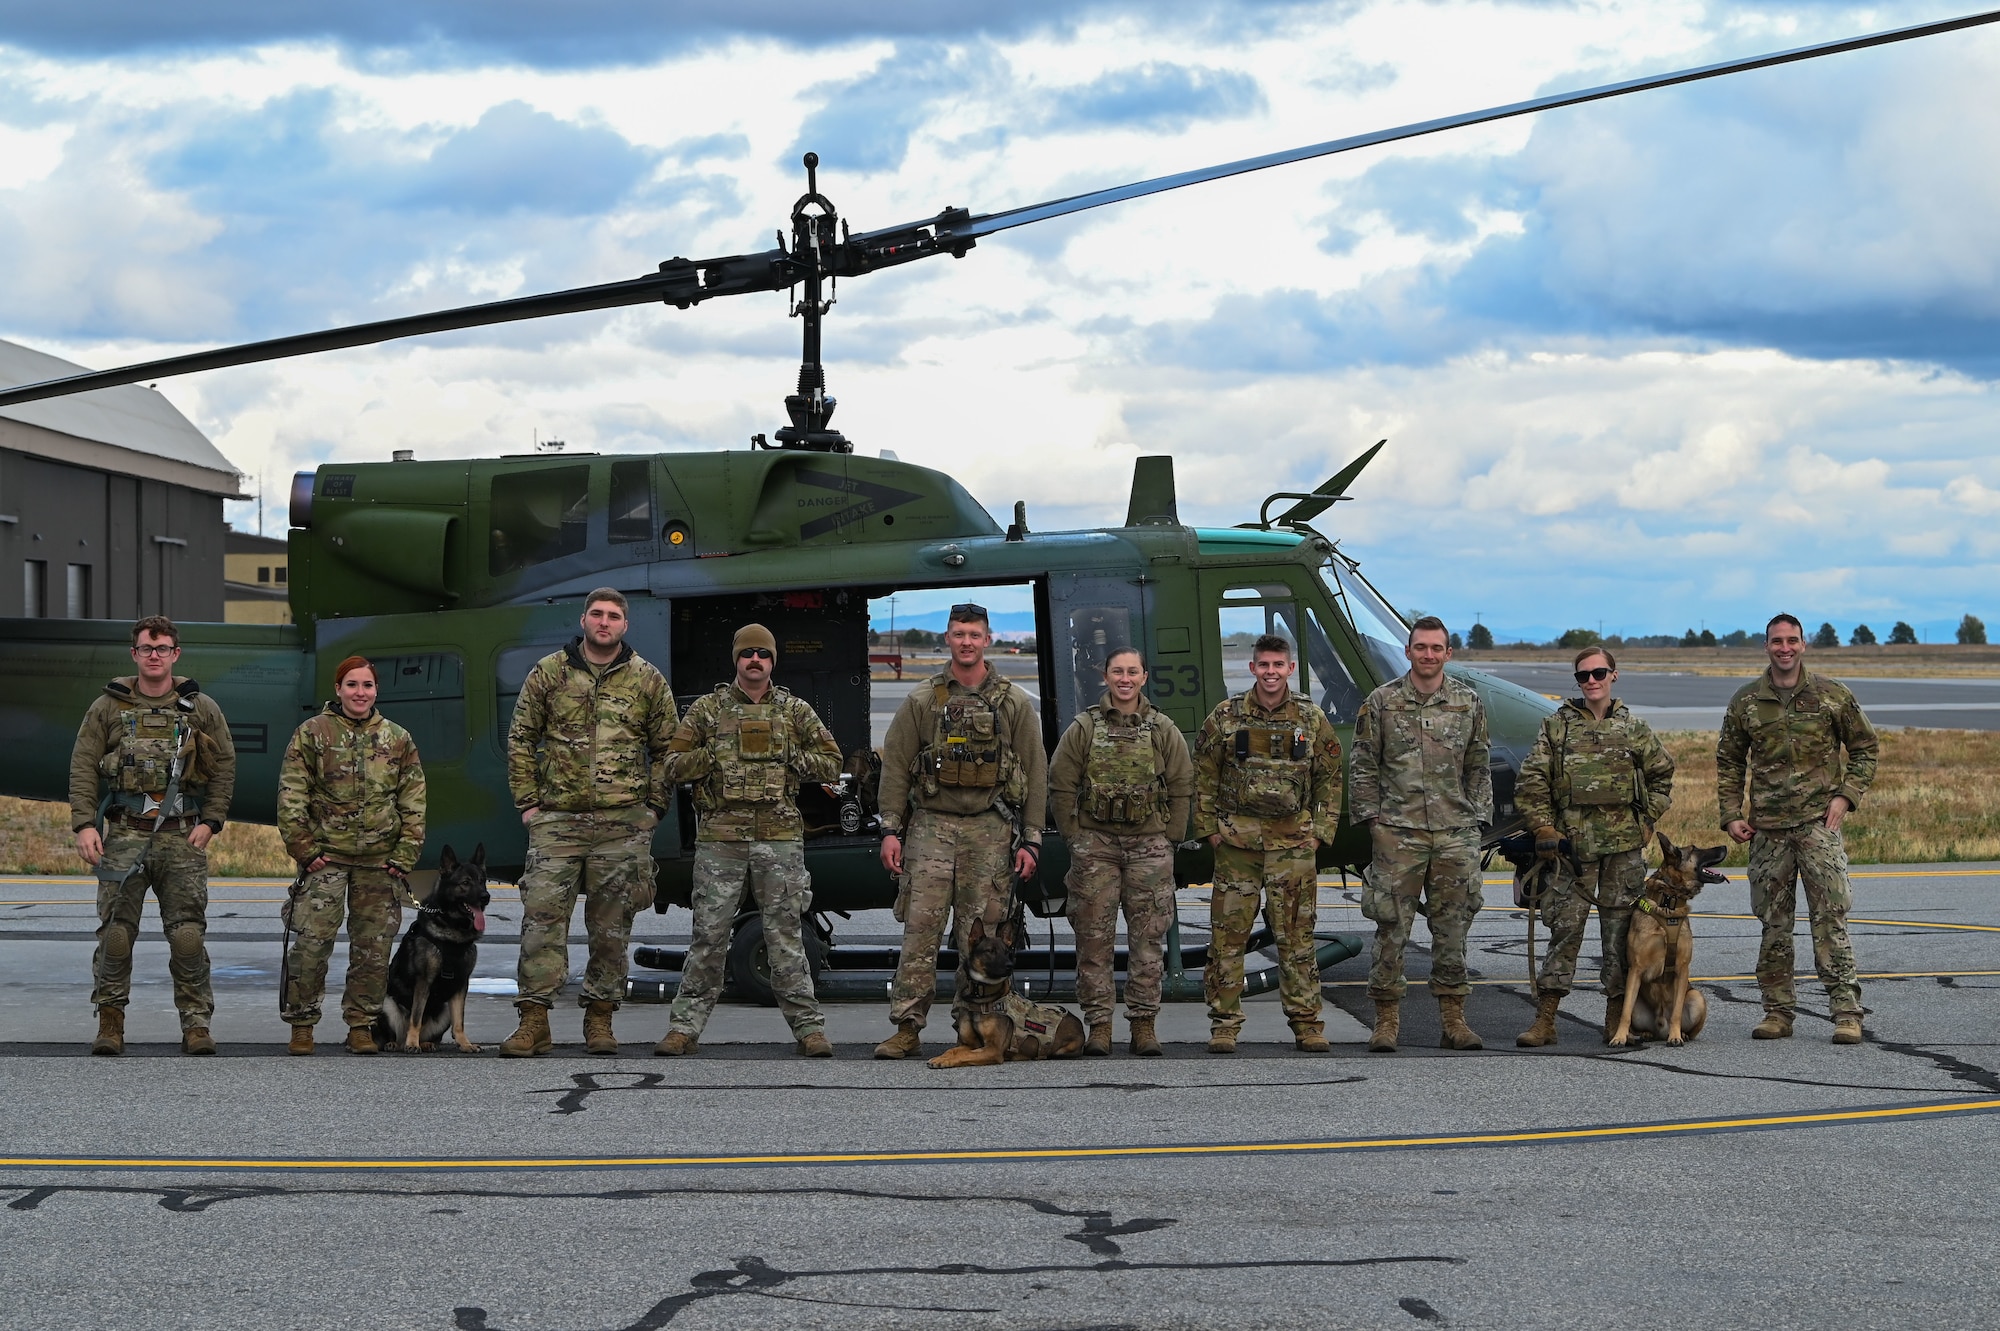 U.S. Air Force Military Working Dog handlers from the 92nd Security Forces Squadron pose for a photo after completing helicopter familiarization training at Fairchild Air Force Base, Washington, Oct 25, 2022. The purpose behind the helicopter training was to expose MWD's to new noises they might hear when boarding and flying on a helicopter. (U.S. Air Force photo by Airman 1st Class Stassney Davis)